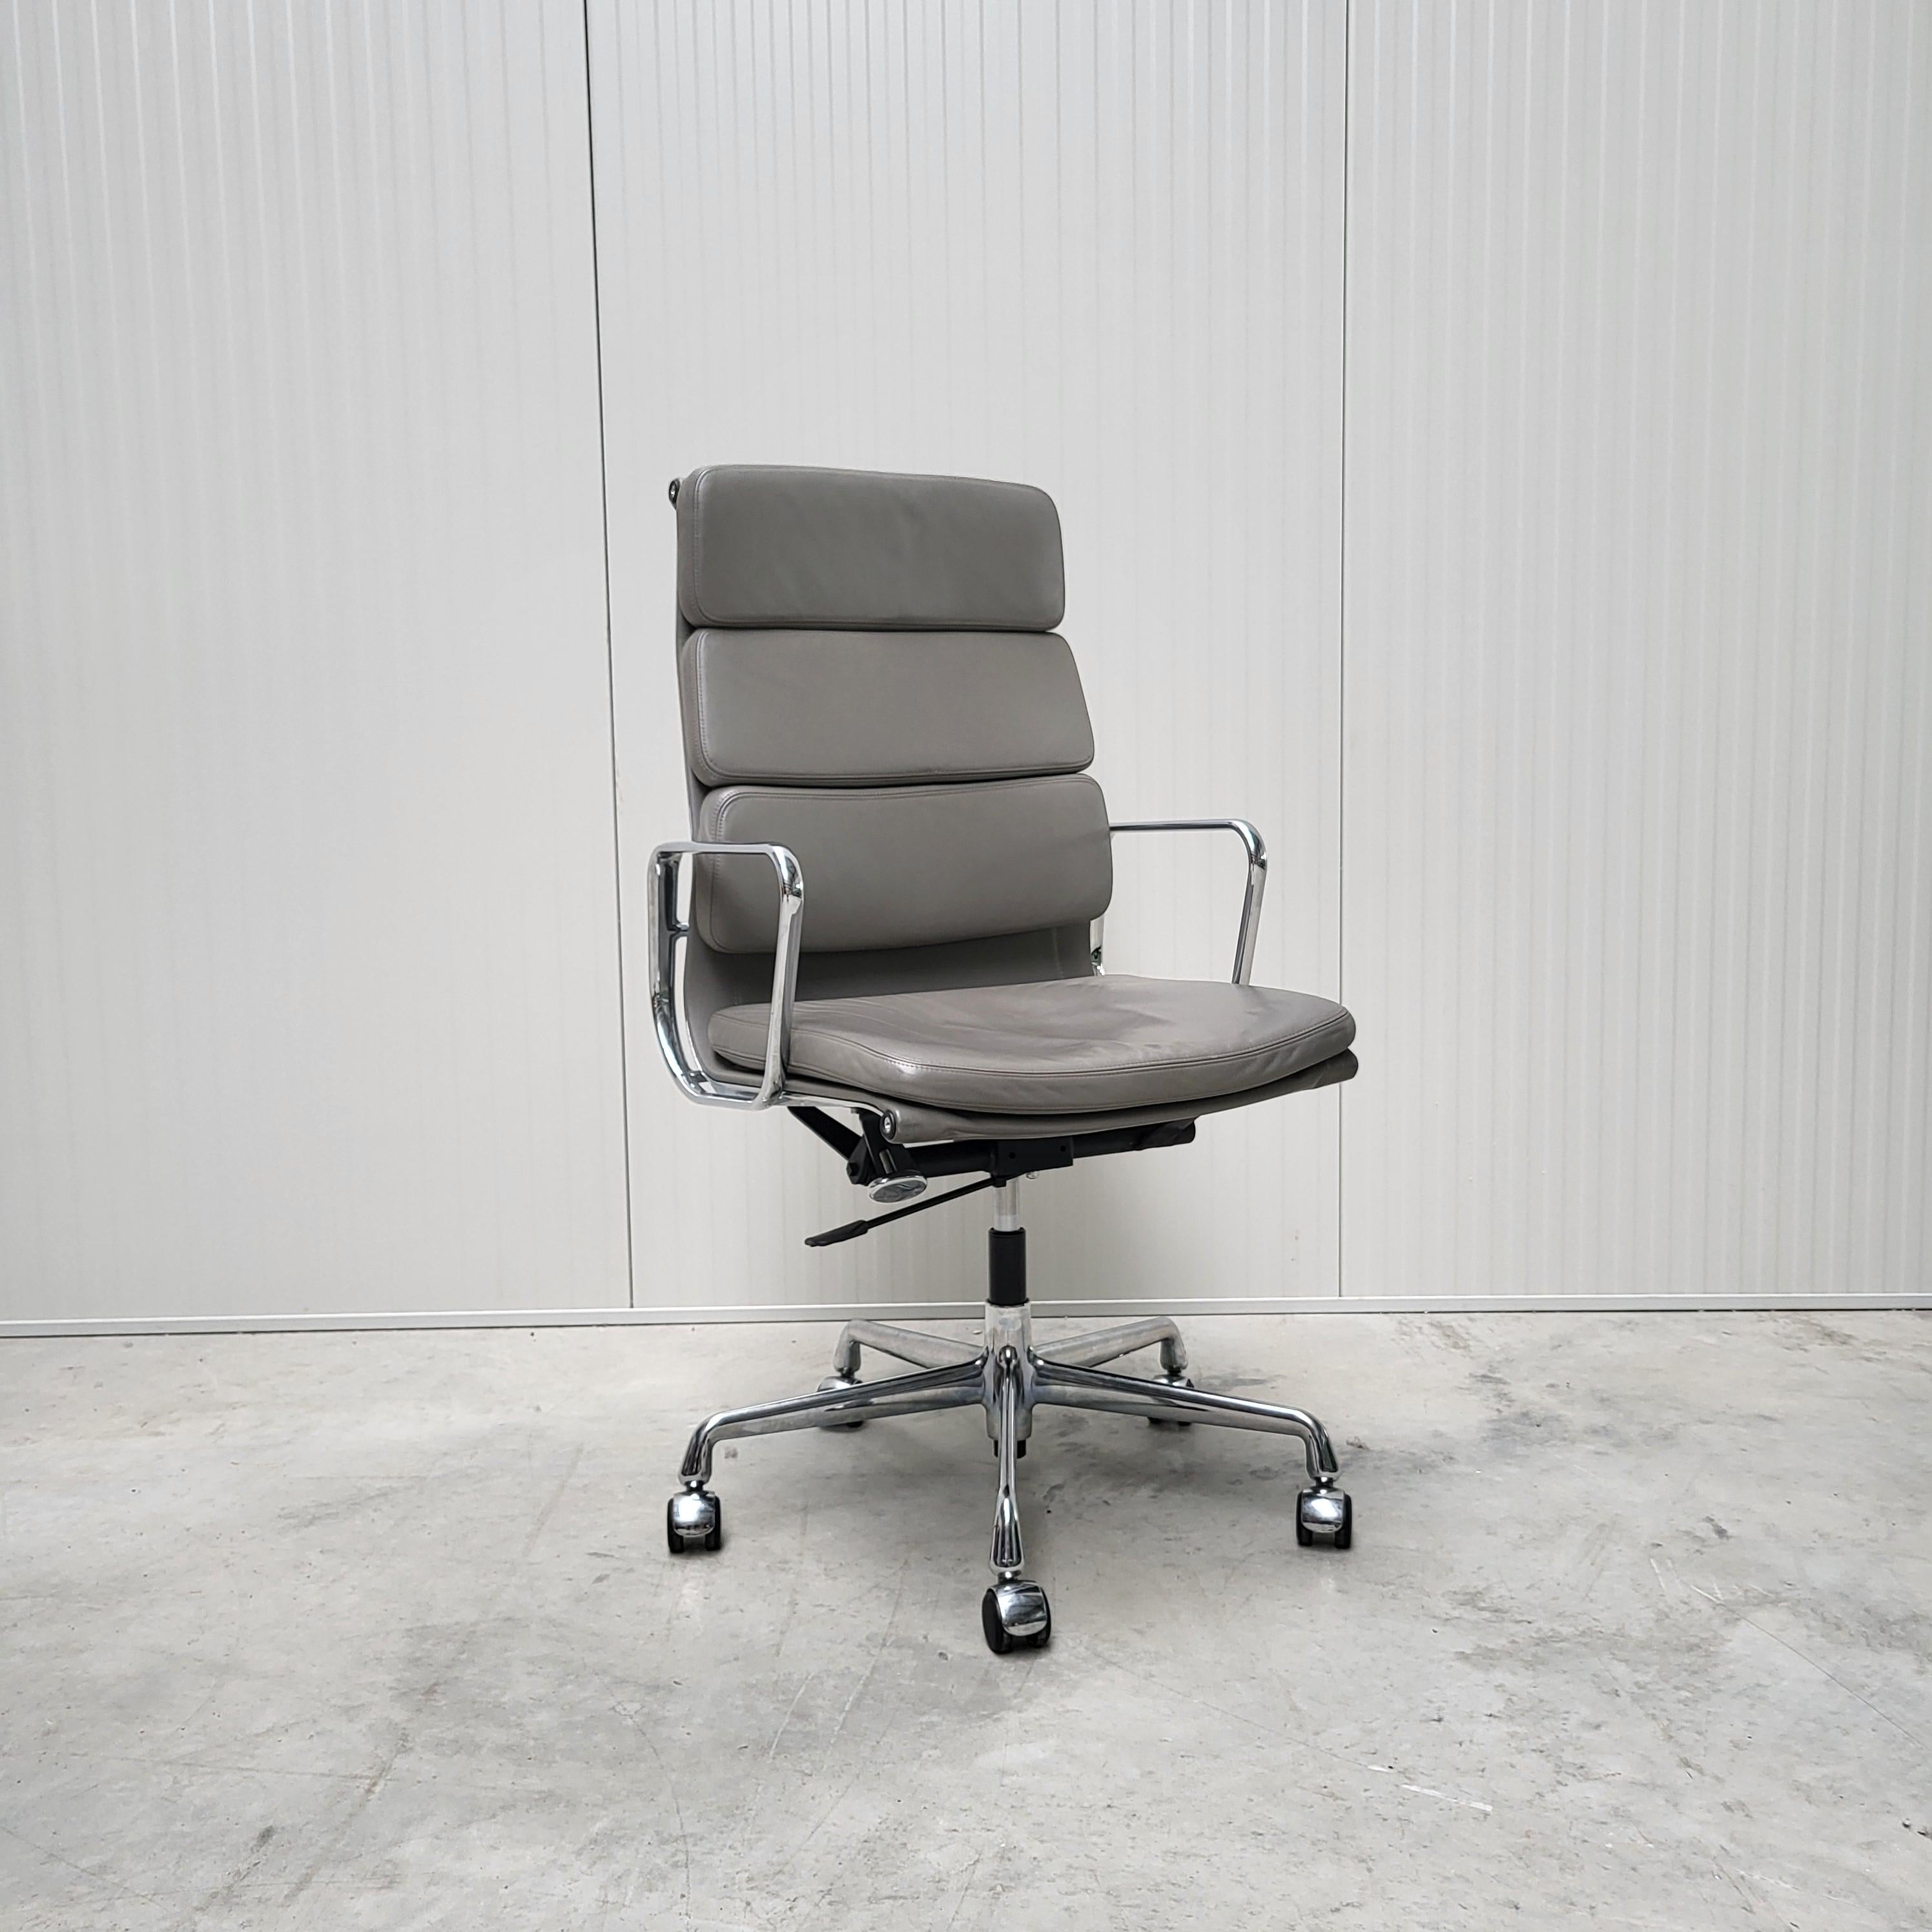 Very nice soft pad office chair model EA219 produced by Vitra. 
The chair features a chromed aluminium frame and was made in 2003.

The chair is height adjustable and has a tilt mechanism both of which are working very smoothly.

It has a wonderful